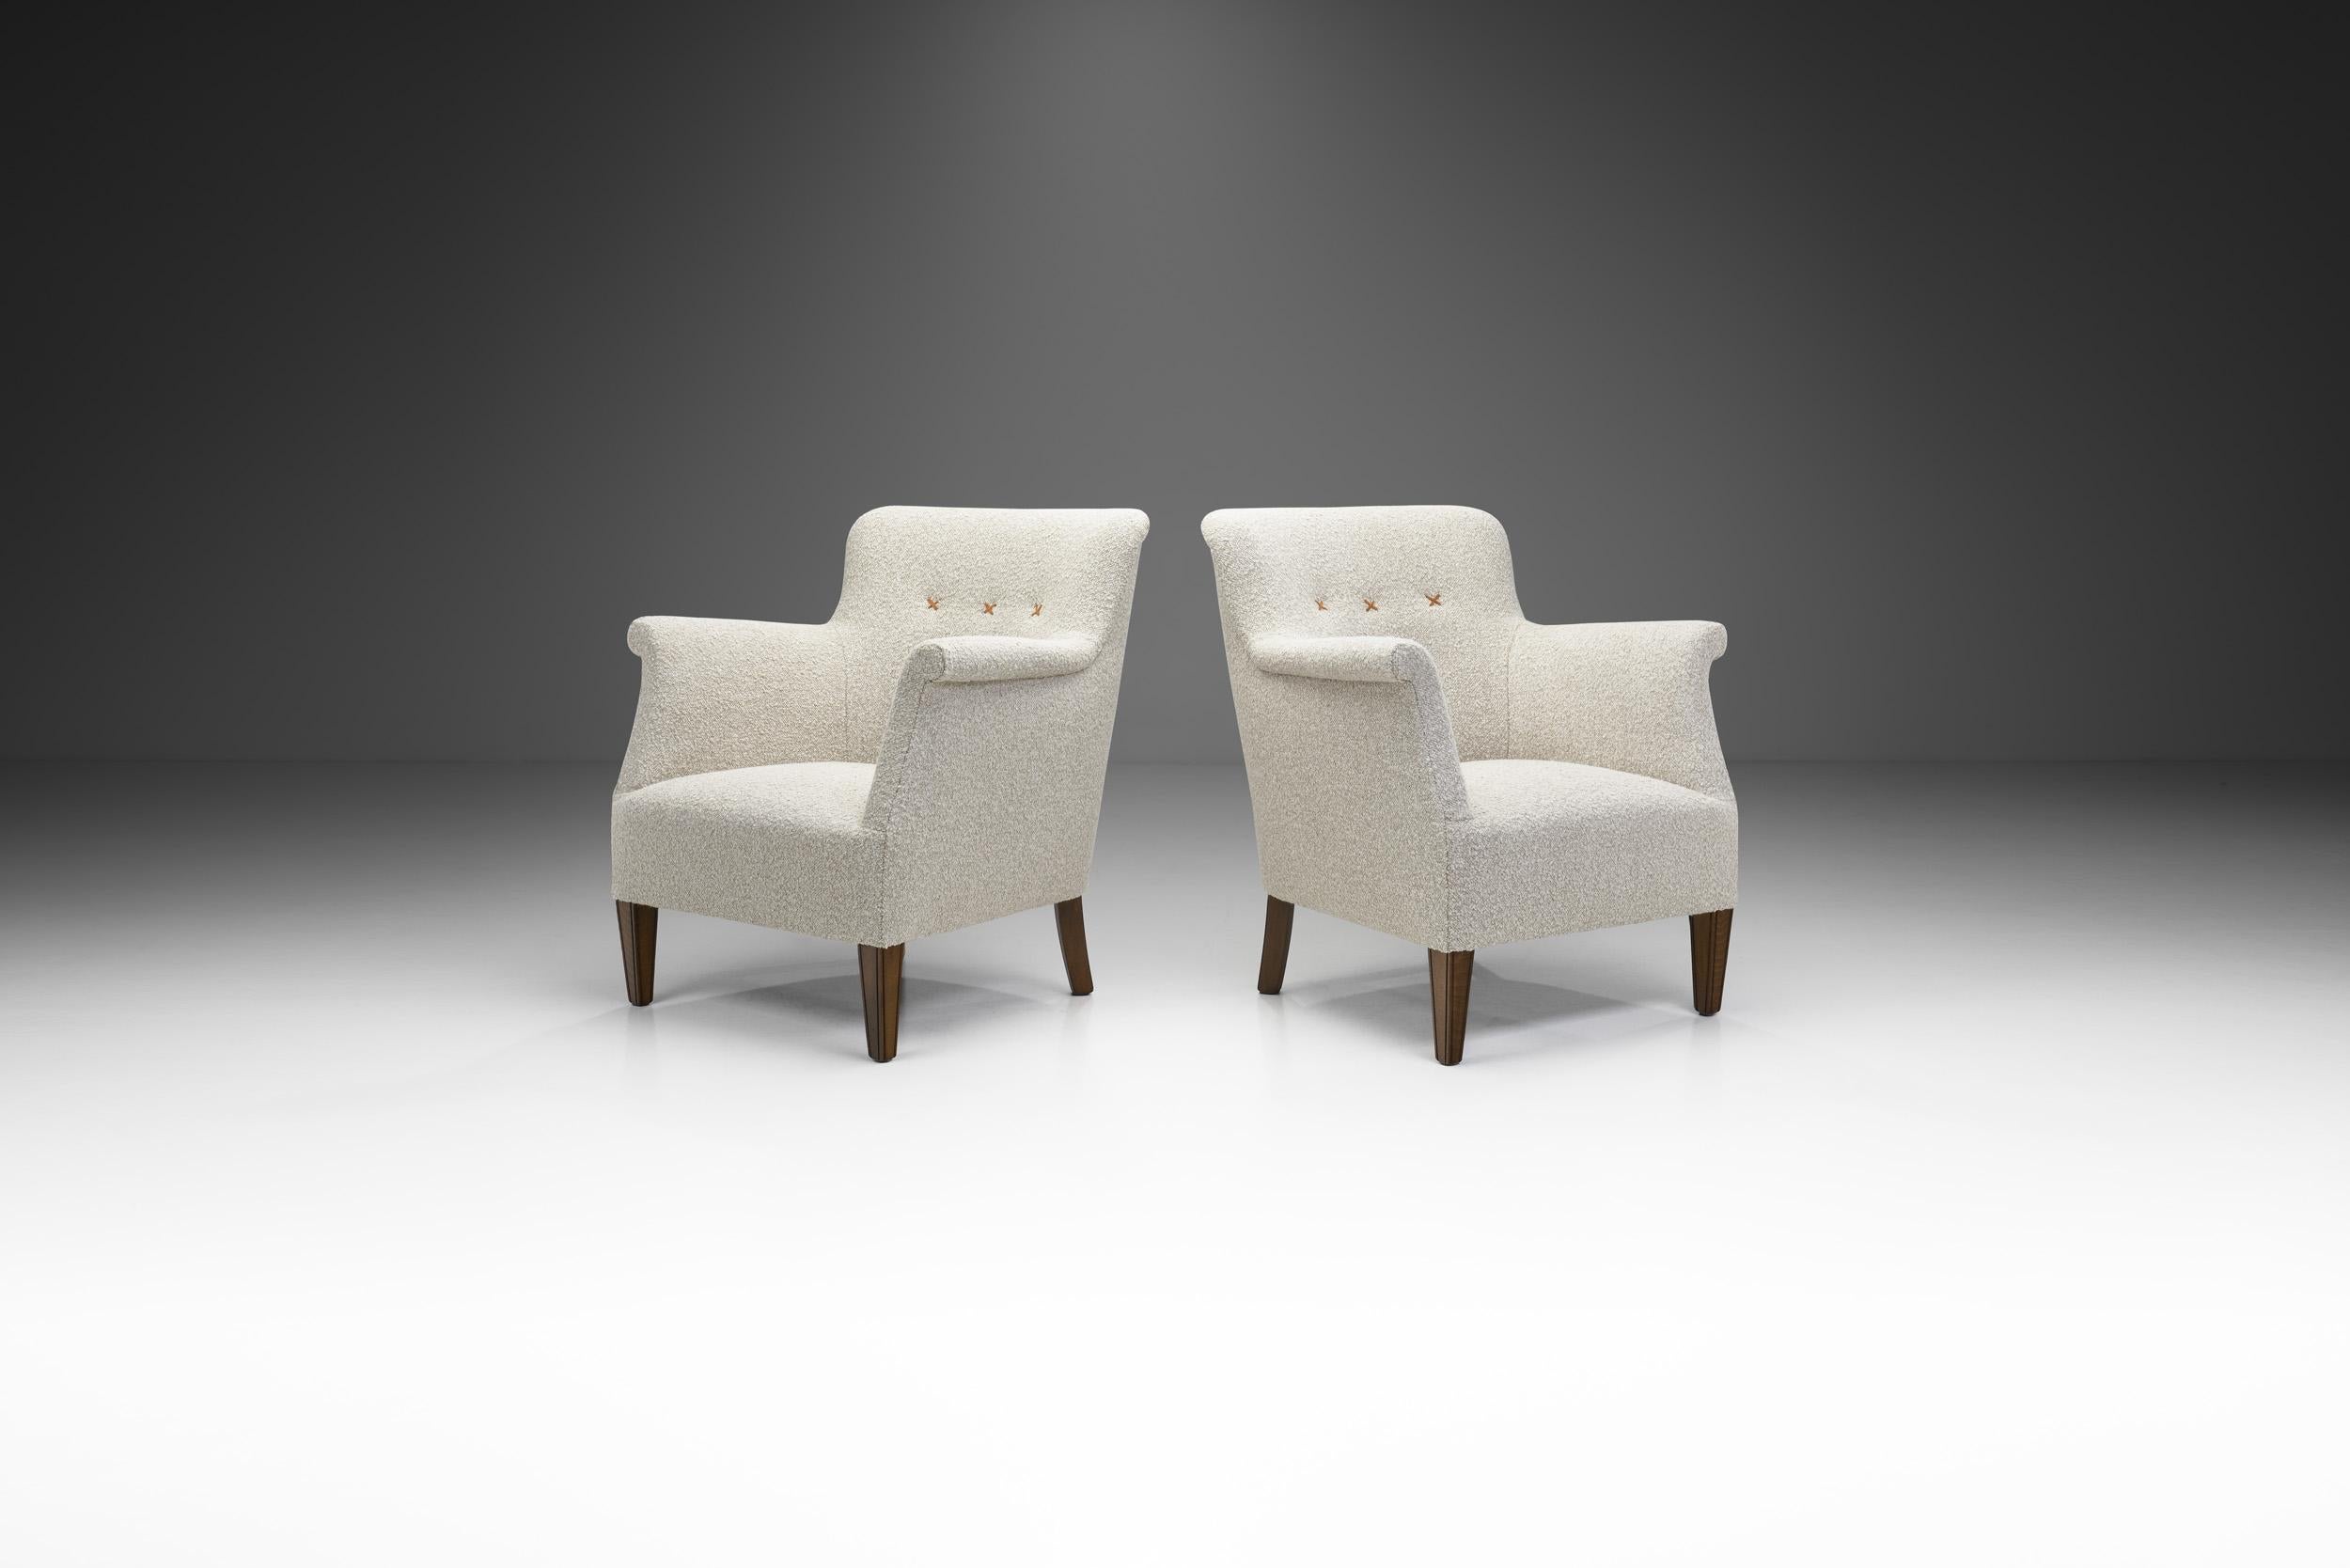 This pair of Danish-made easy chairs is characterized by the best qualities of Danish mid-century design. From the restrained aesthetic to the elegant pairing of materials, these upholstered models are the perfect examples of how pairing Danish